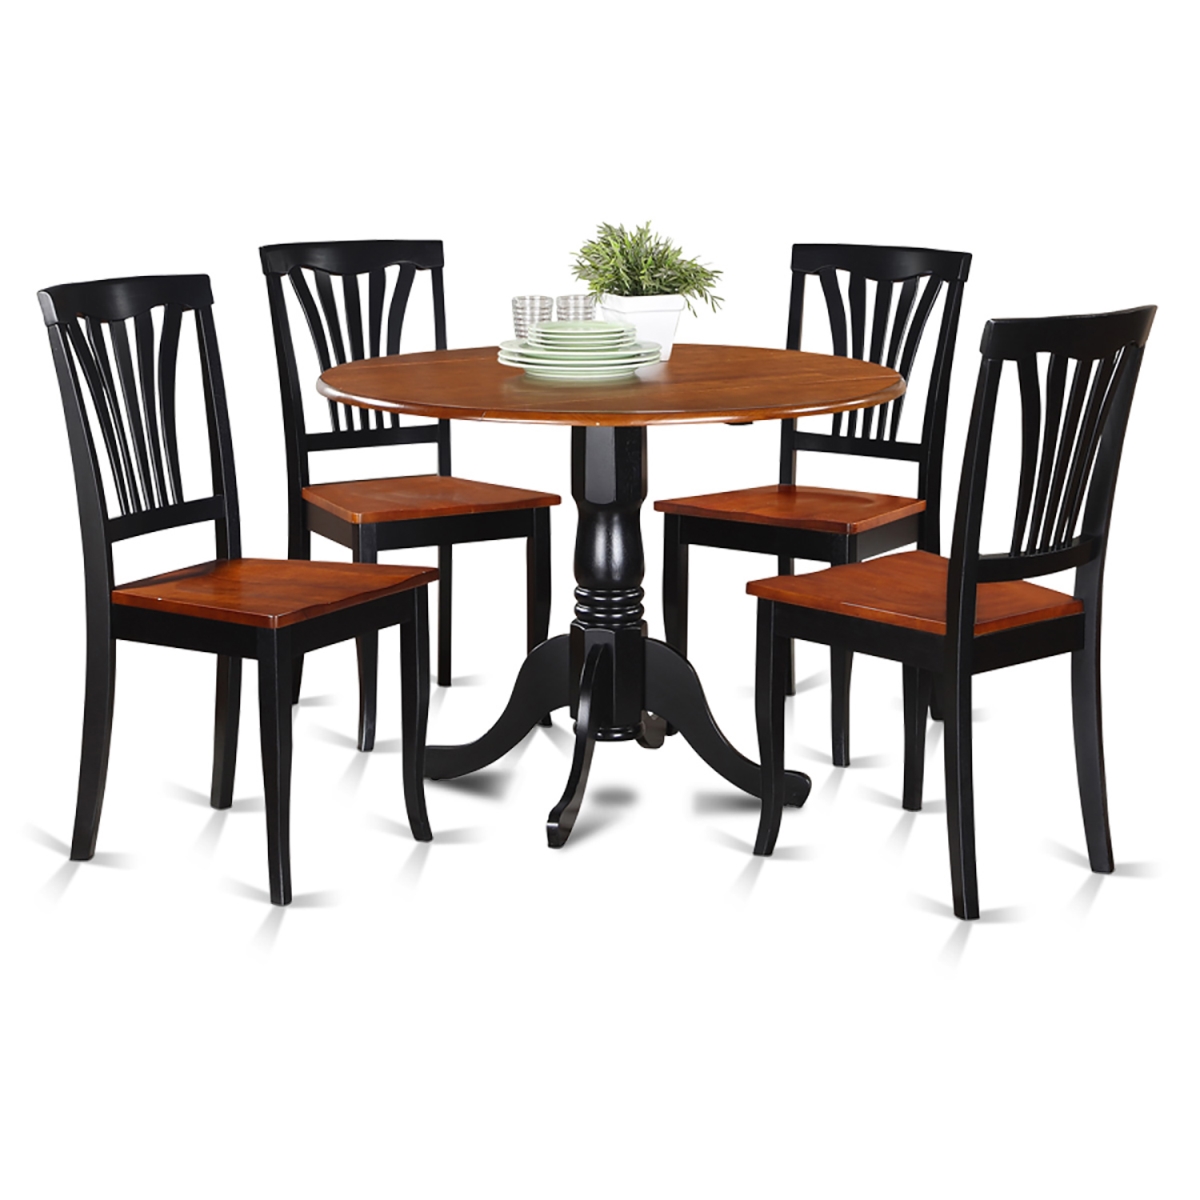 Picture of East West Furniture DLAV5-BLK-W Dublin Kitchen Table Set - Dining Table & 4 Wooden Chairs - 5 Piece